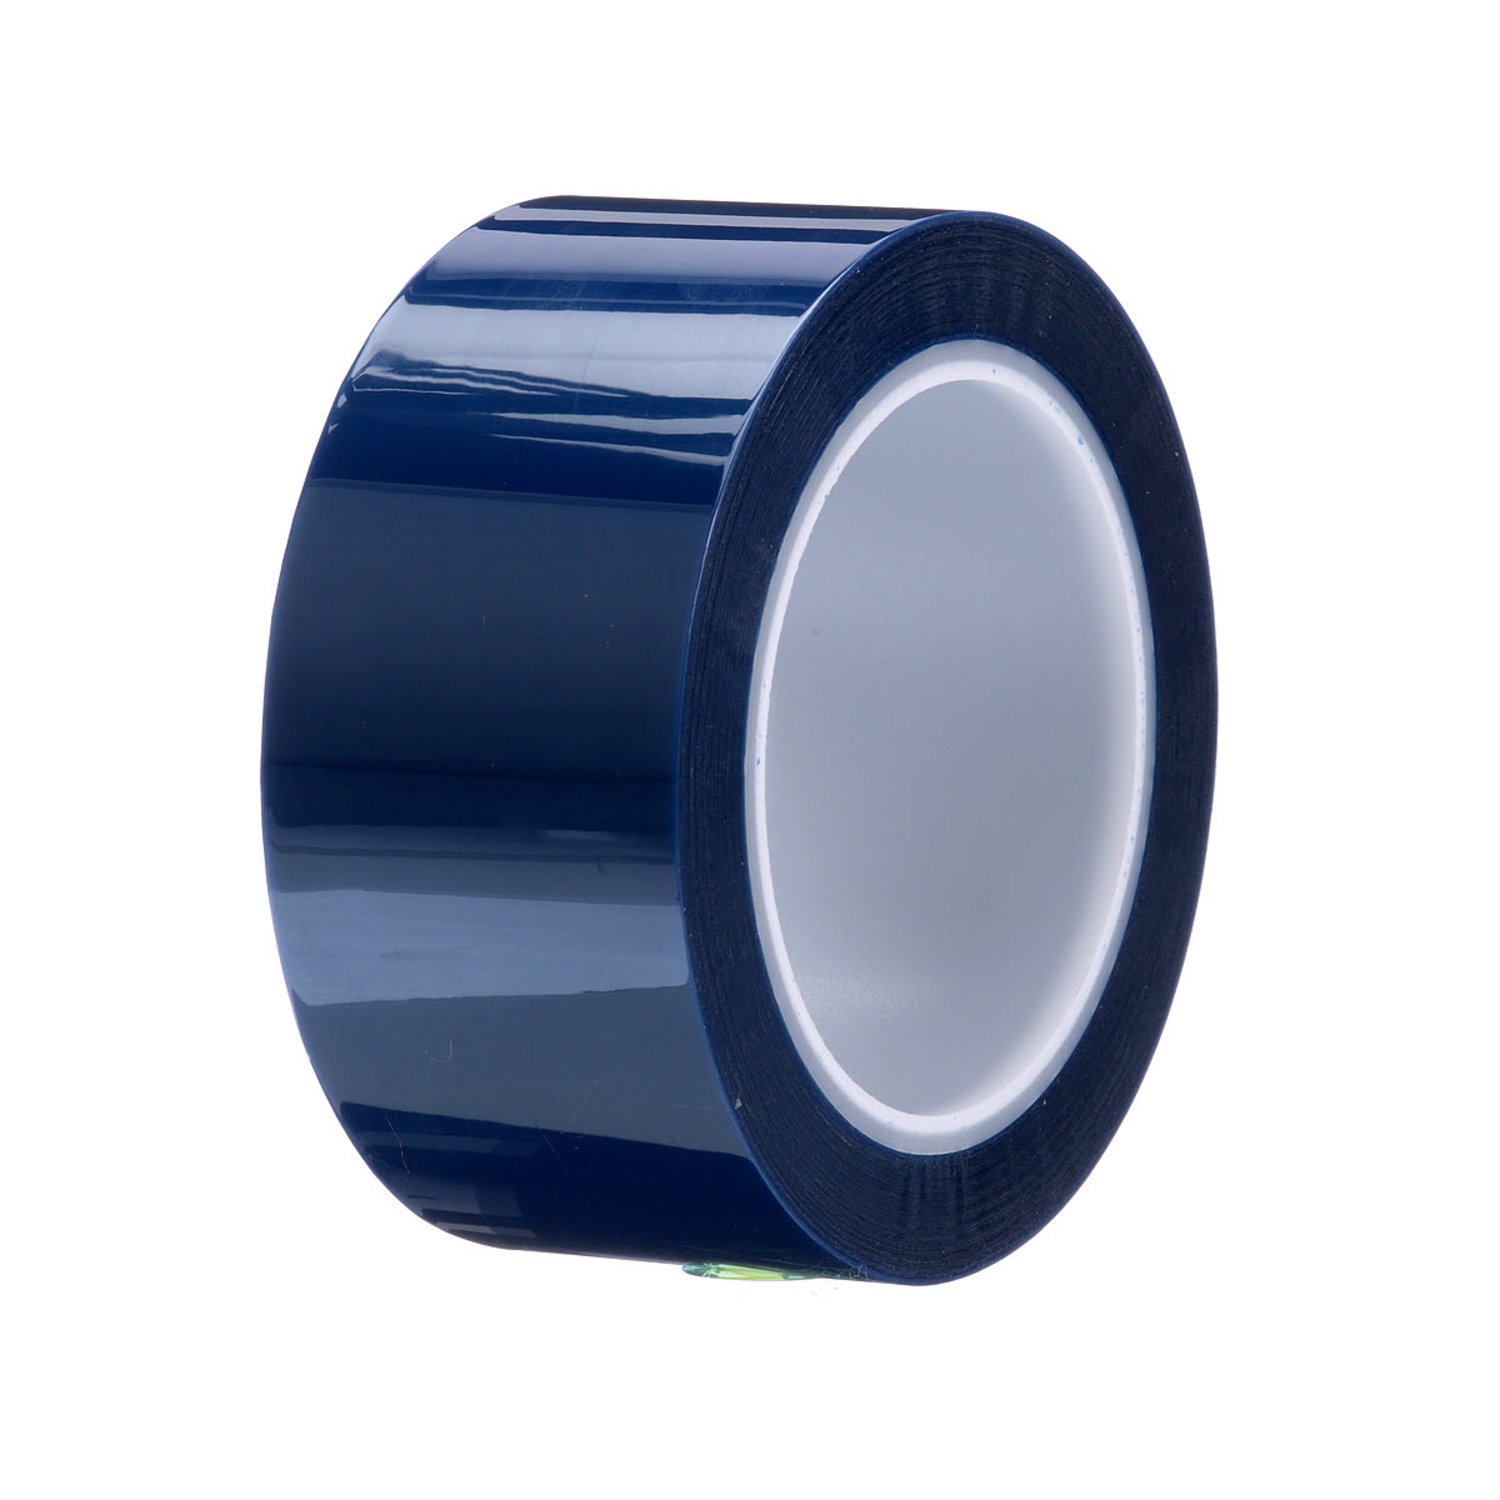 7000049779 - 3M Polyester Tape 8991, Blue, 2 in x 72 yd, 2.4 mil, 24 rolls per case